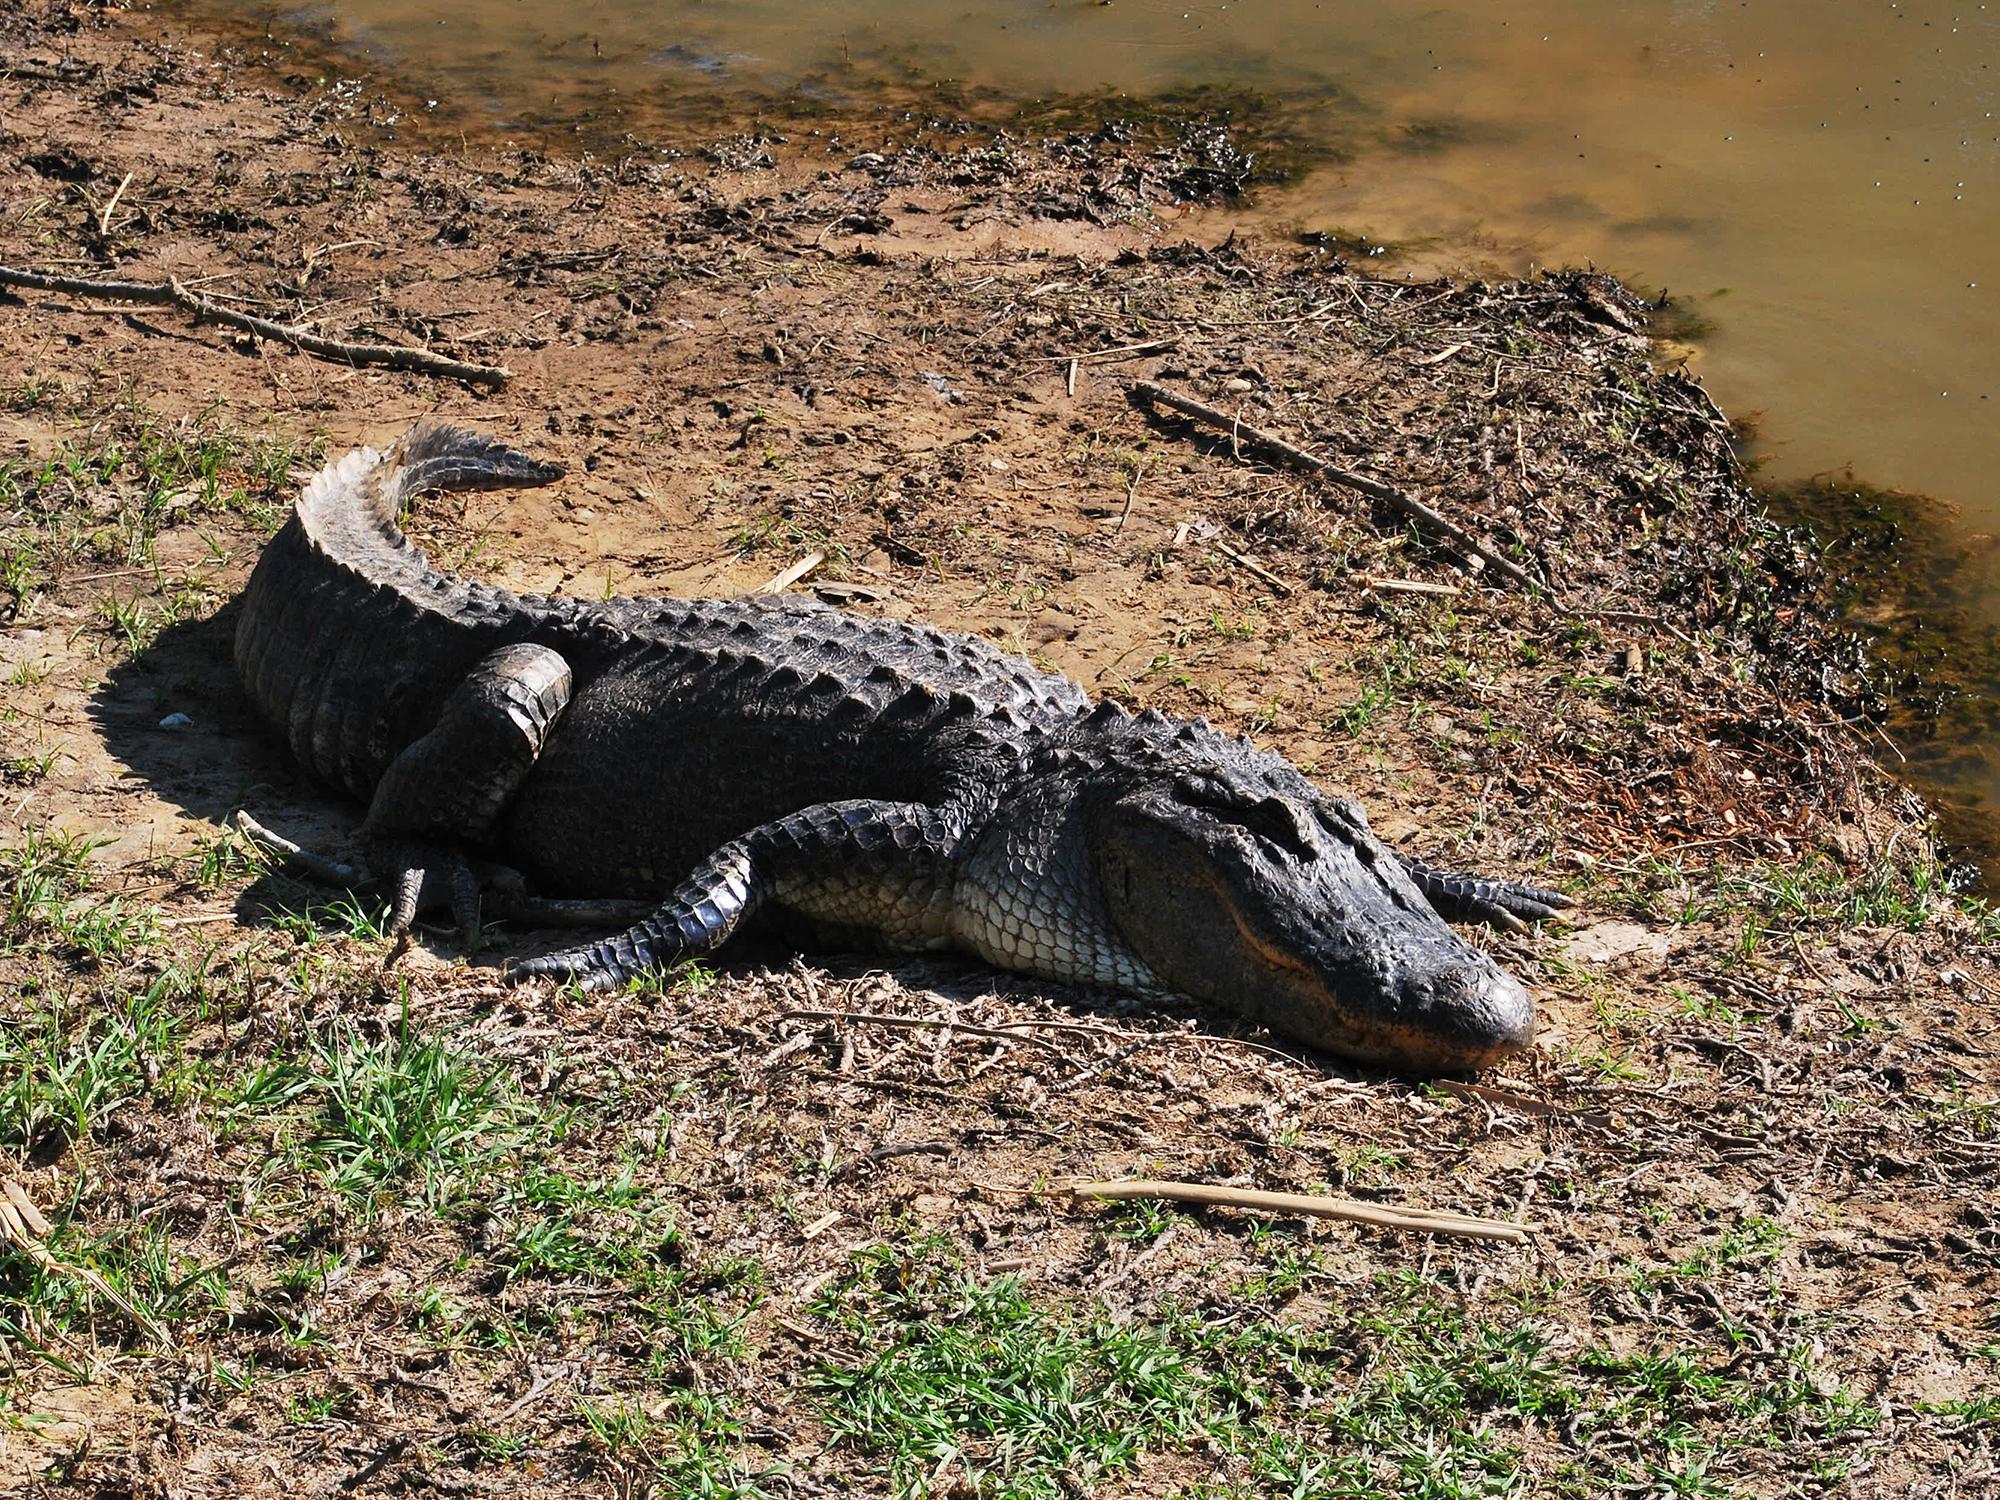 A large alligator rests on the shoreline beside water on a sunny day.